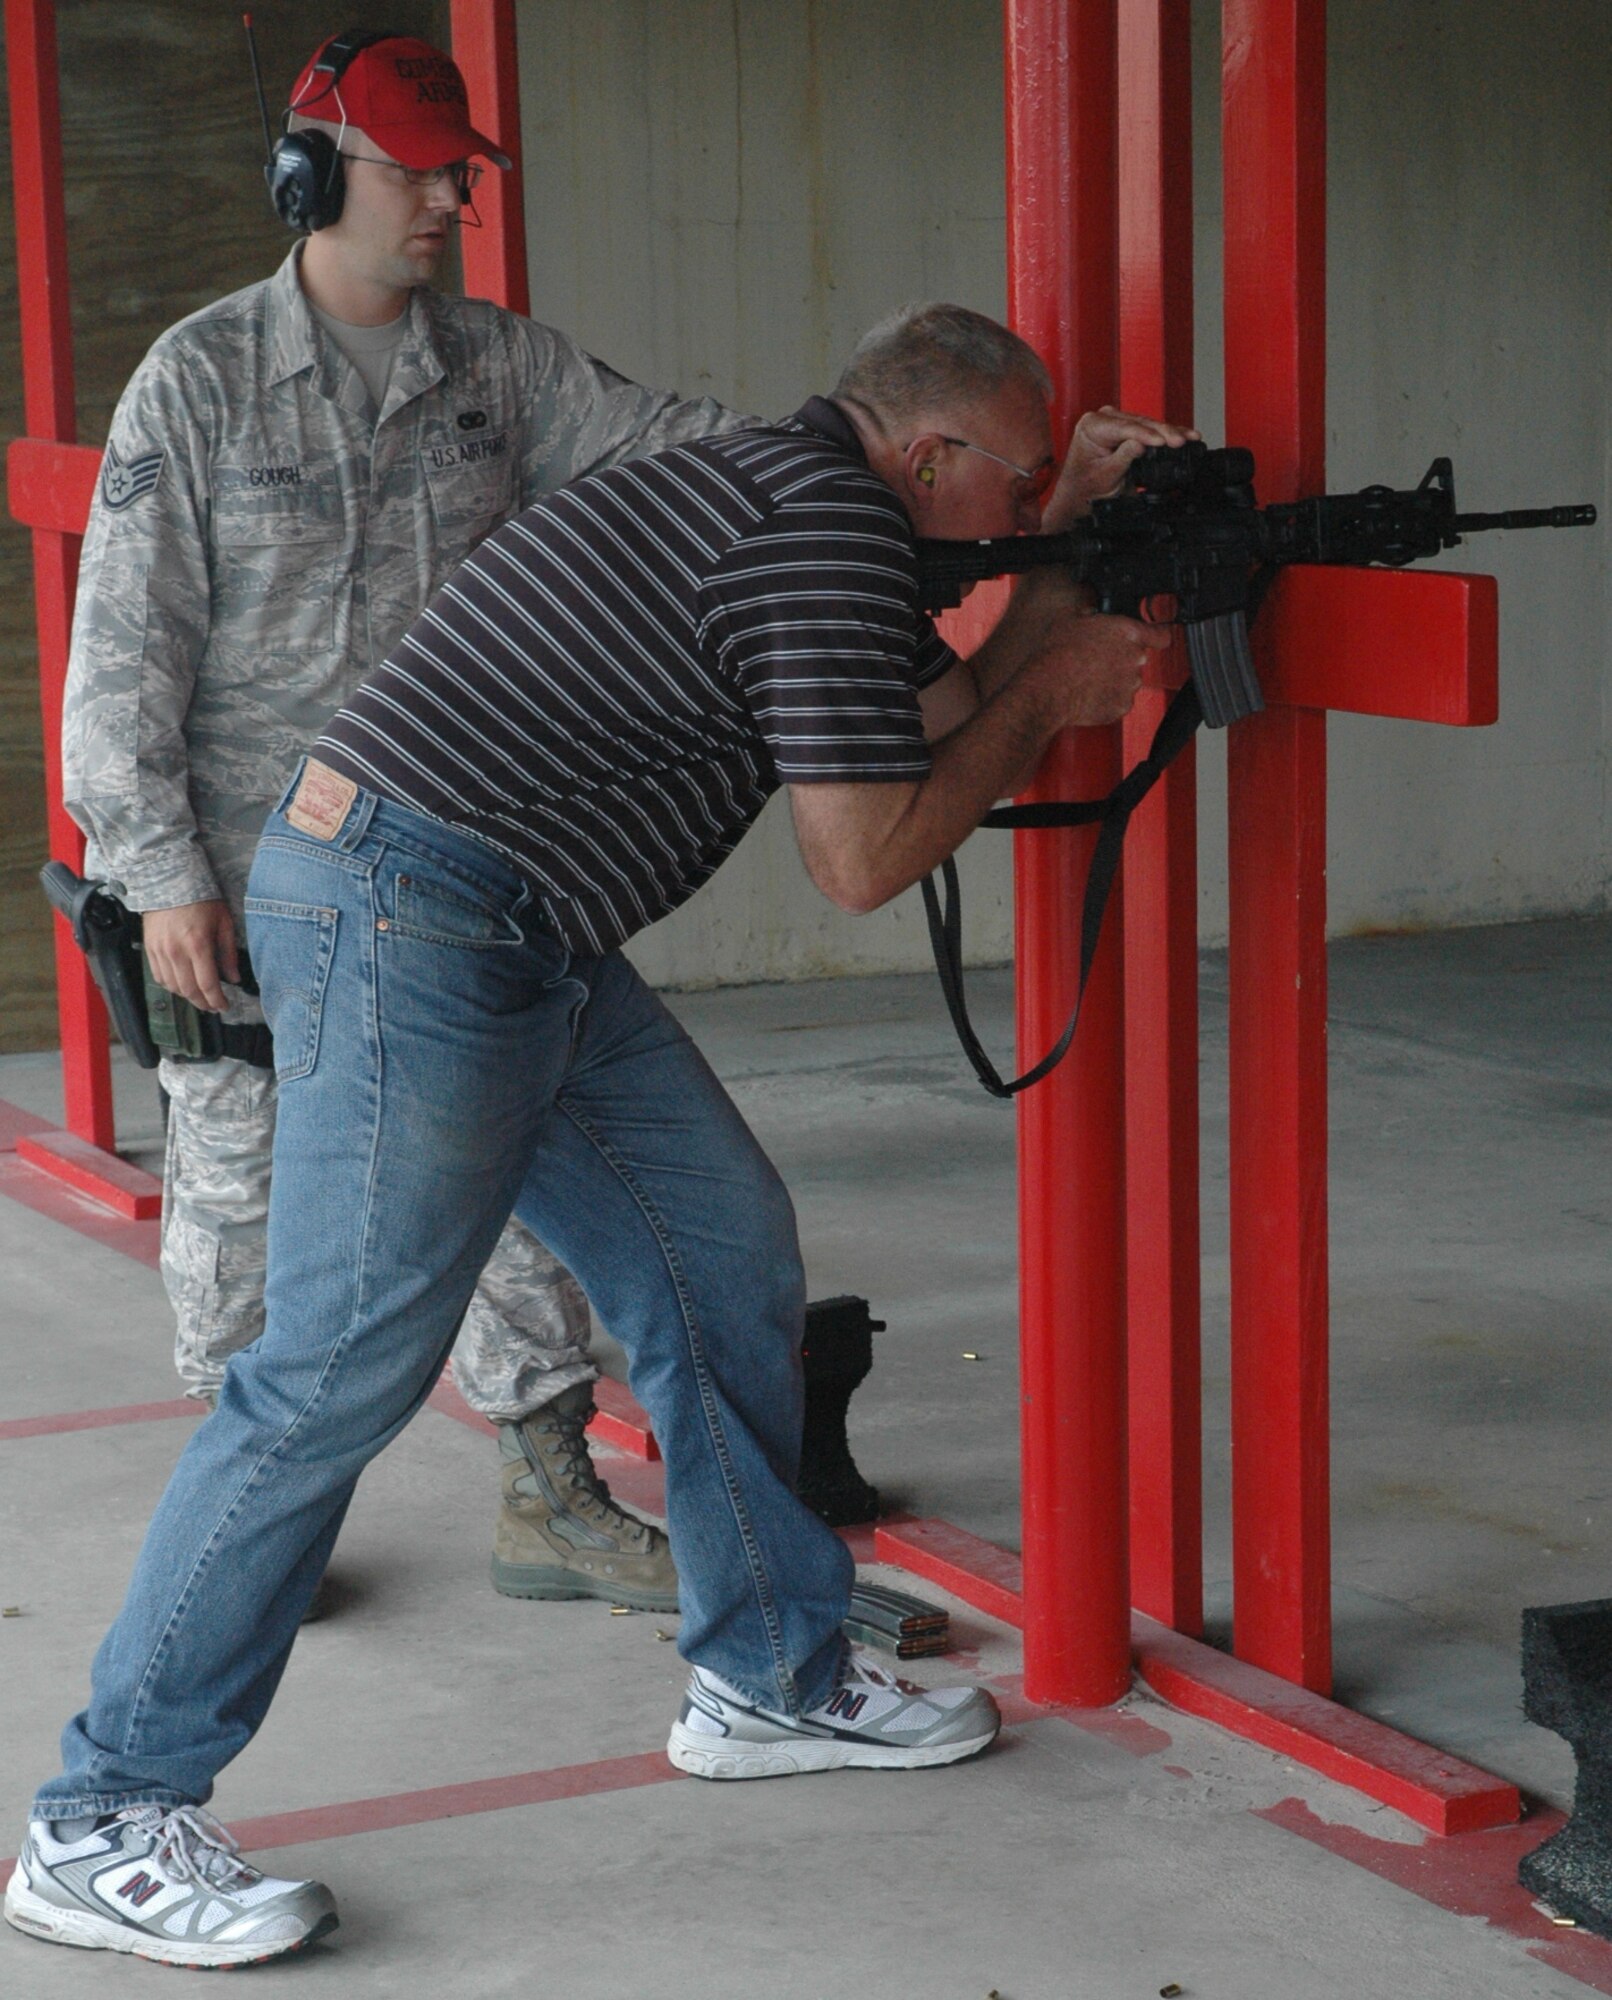 Staff Sgt. Simeon Gough, 325th Security Forces Squadron Combat Arms scheduler, instructs Todd Bender, world-class skeet shooter, how to fire the M4 rifle Thursday.  “Mr. Bender provides a great service to Americans while teaching important shooting fundamentals and it was a great honor of mine to have the opportunity to show him some of the Air Force’s weapon systems,” said Sergeant Gough.  (U.S. Air Force photo/ Senior Airman Anthony J. Hyatt)